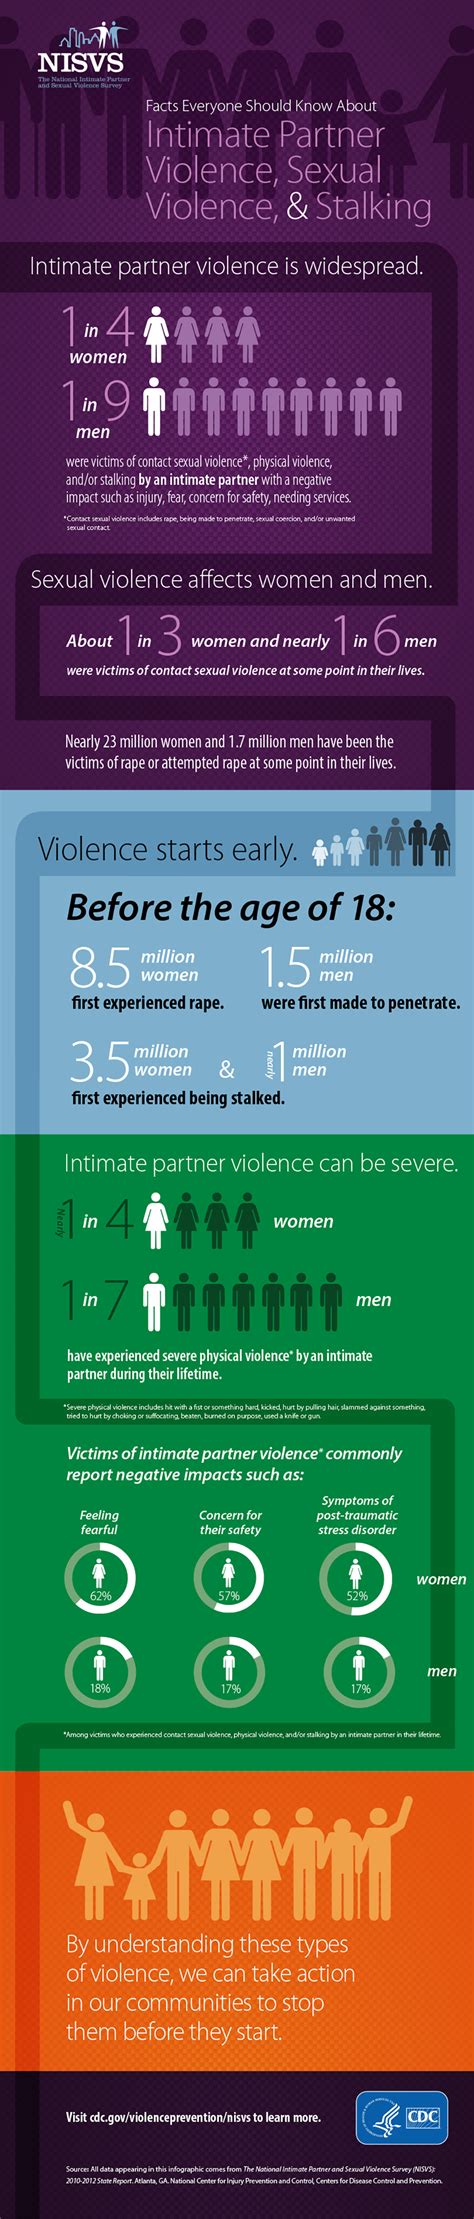 national intimate partner and sexual violence survey nisvs infographic violence prevention